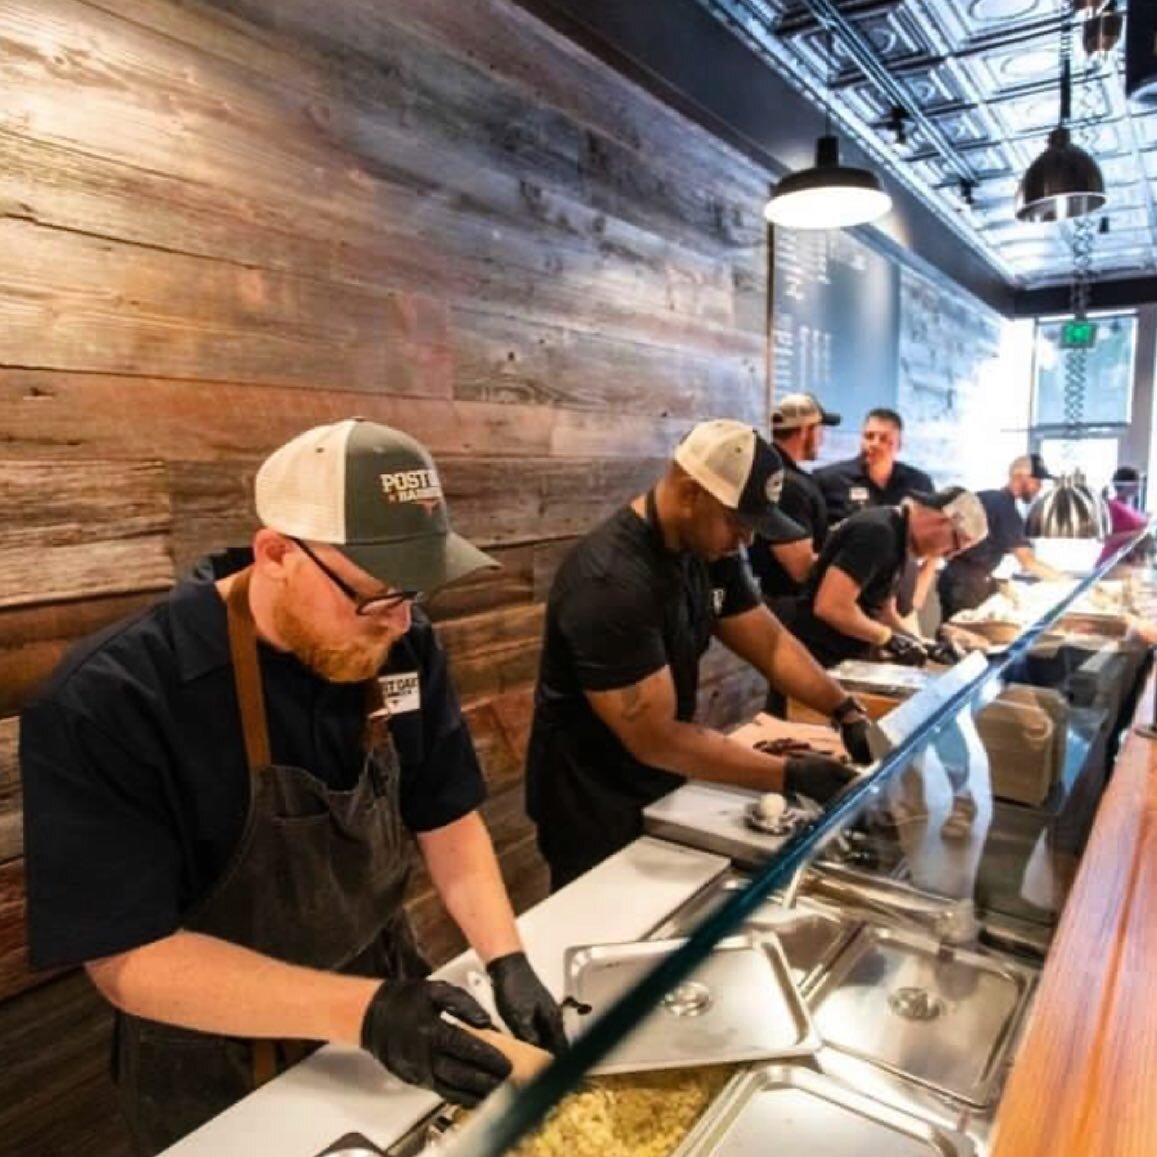 We&rsquo;re hiring meat slicers, line cooks, and well-rounded food service specialists at @postoakdenver! Pay starts at an average of $22/hr and tip share for the year has ranged from $6.25-$13.45/hr. 💰 Send us an email at careers@postoakdenver.com 